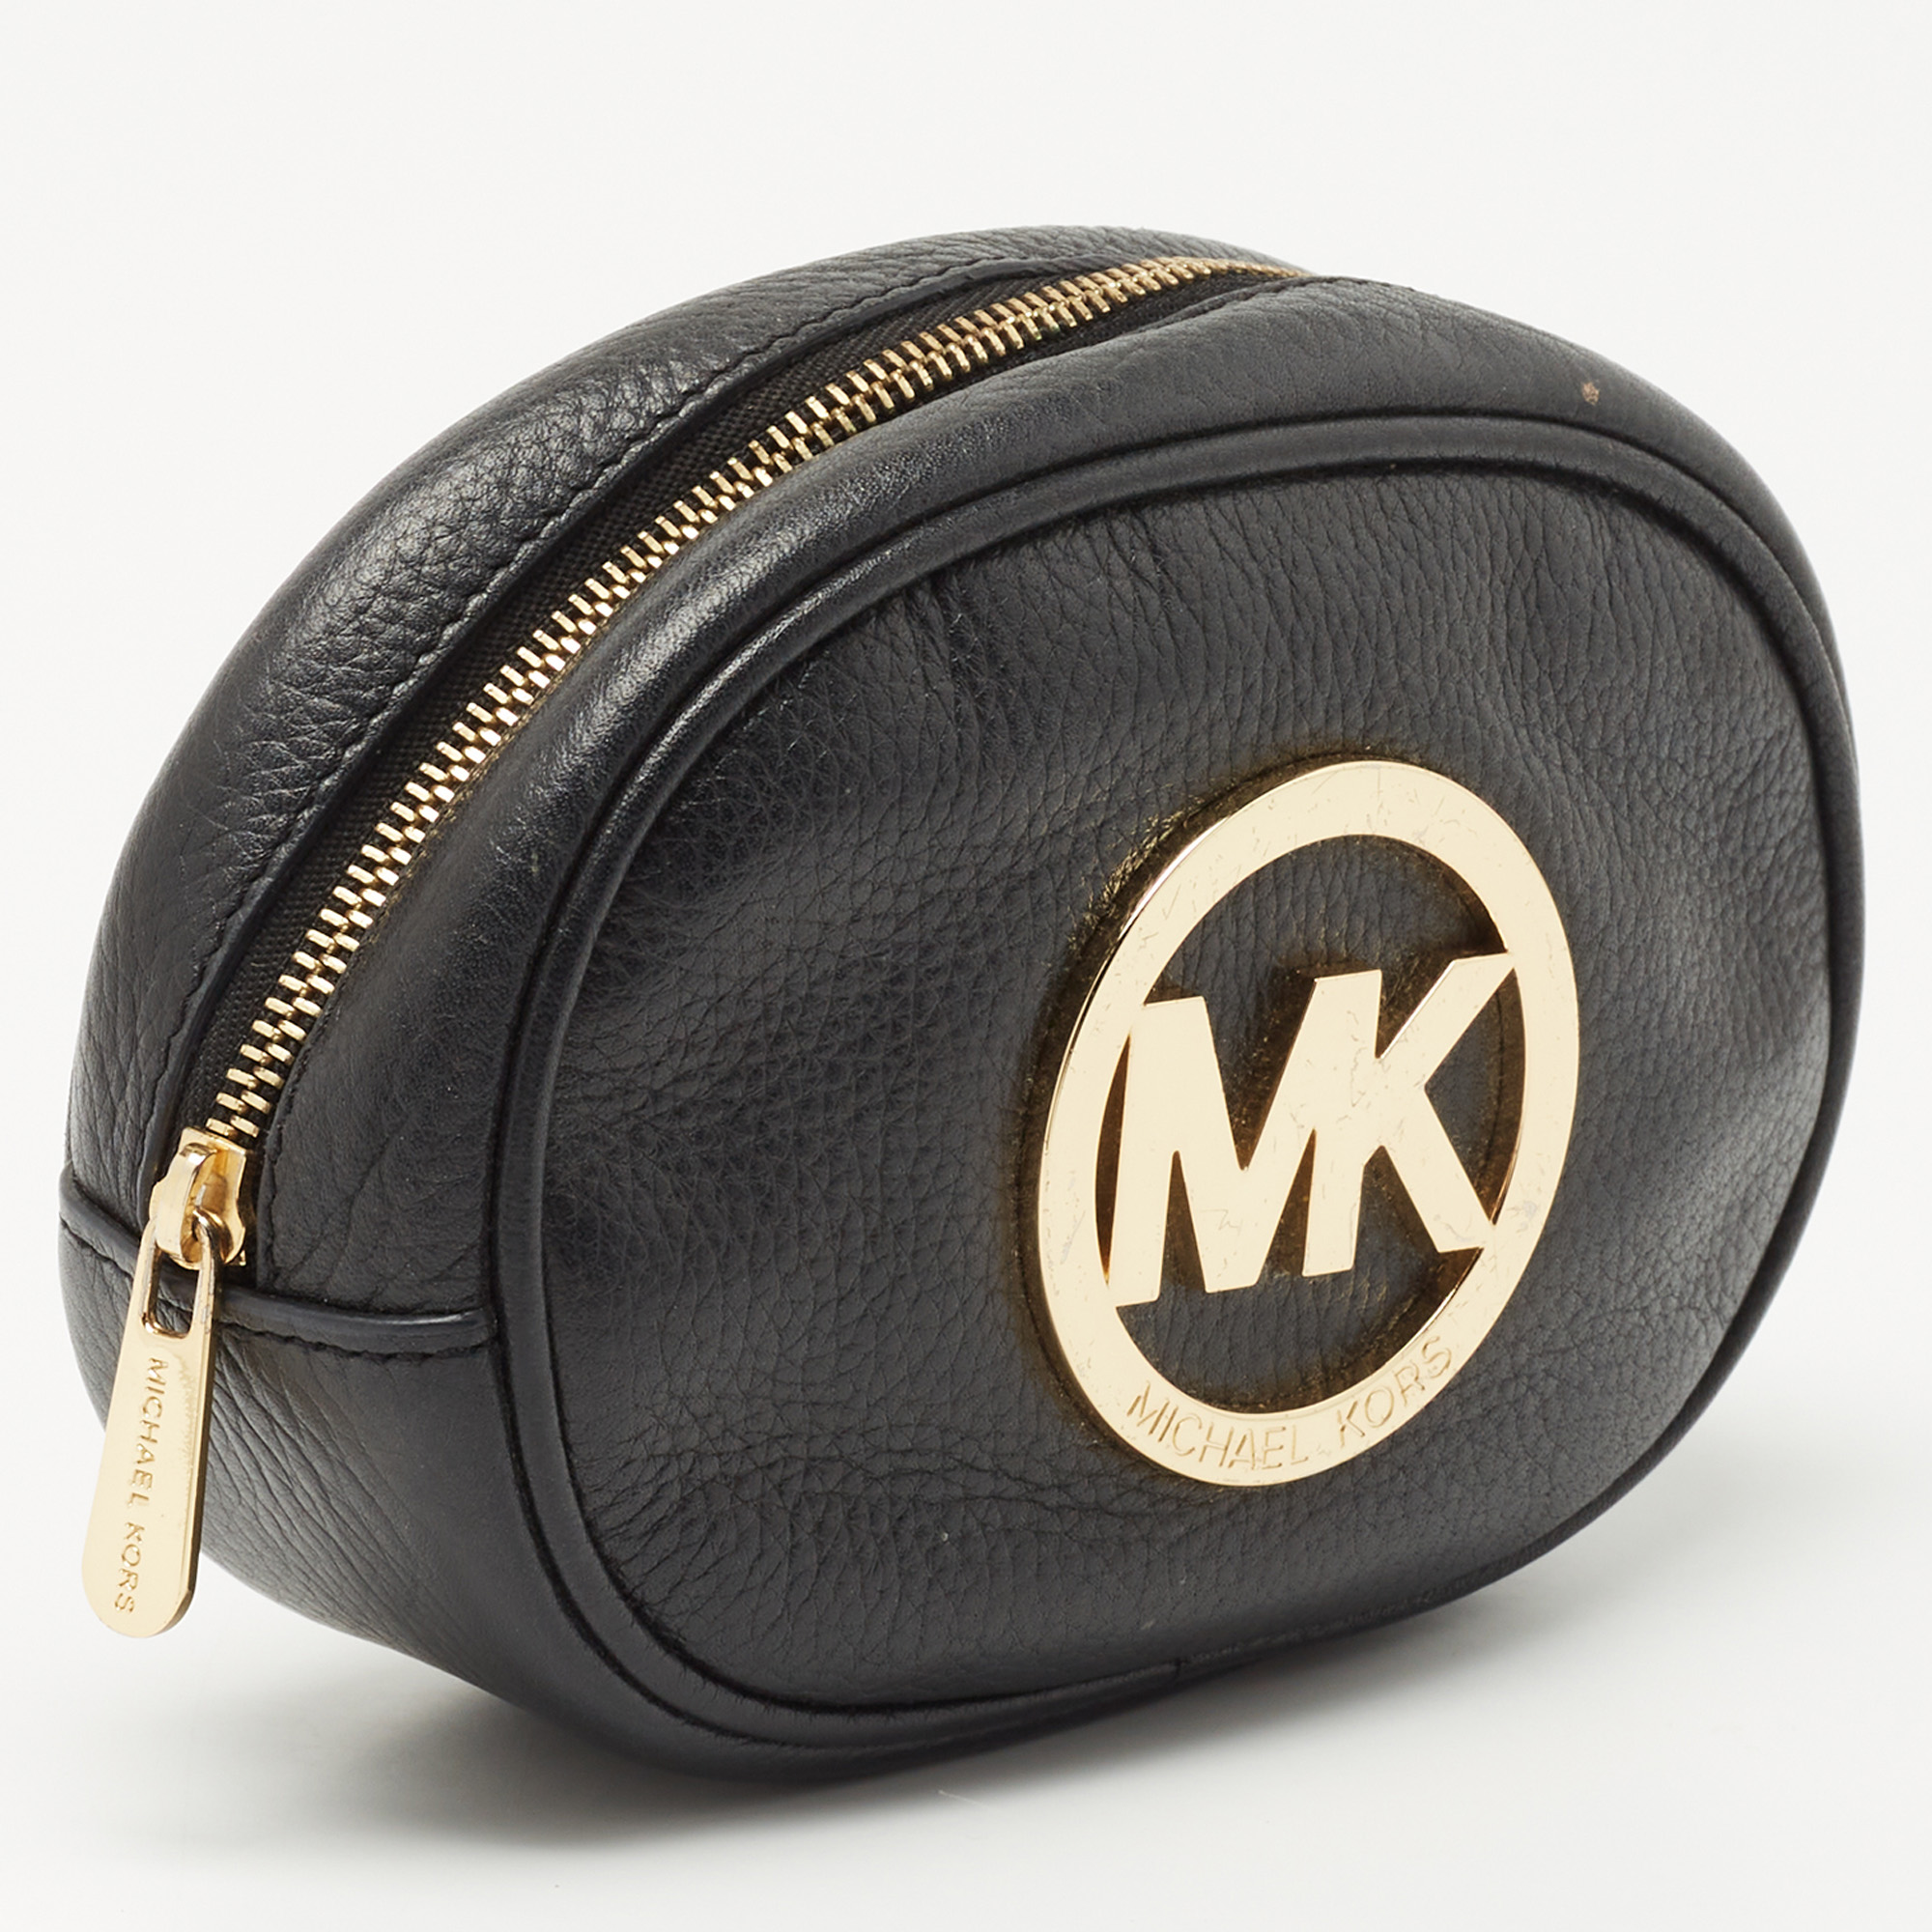 Michael Kors Black Leather Fulton Cosmetic Pouch